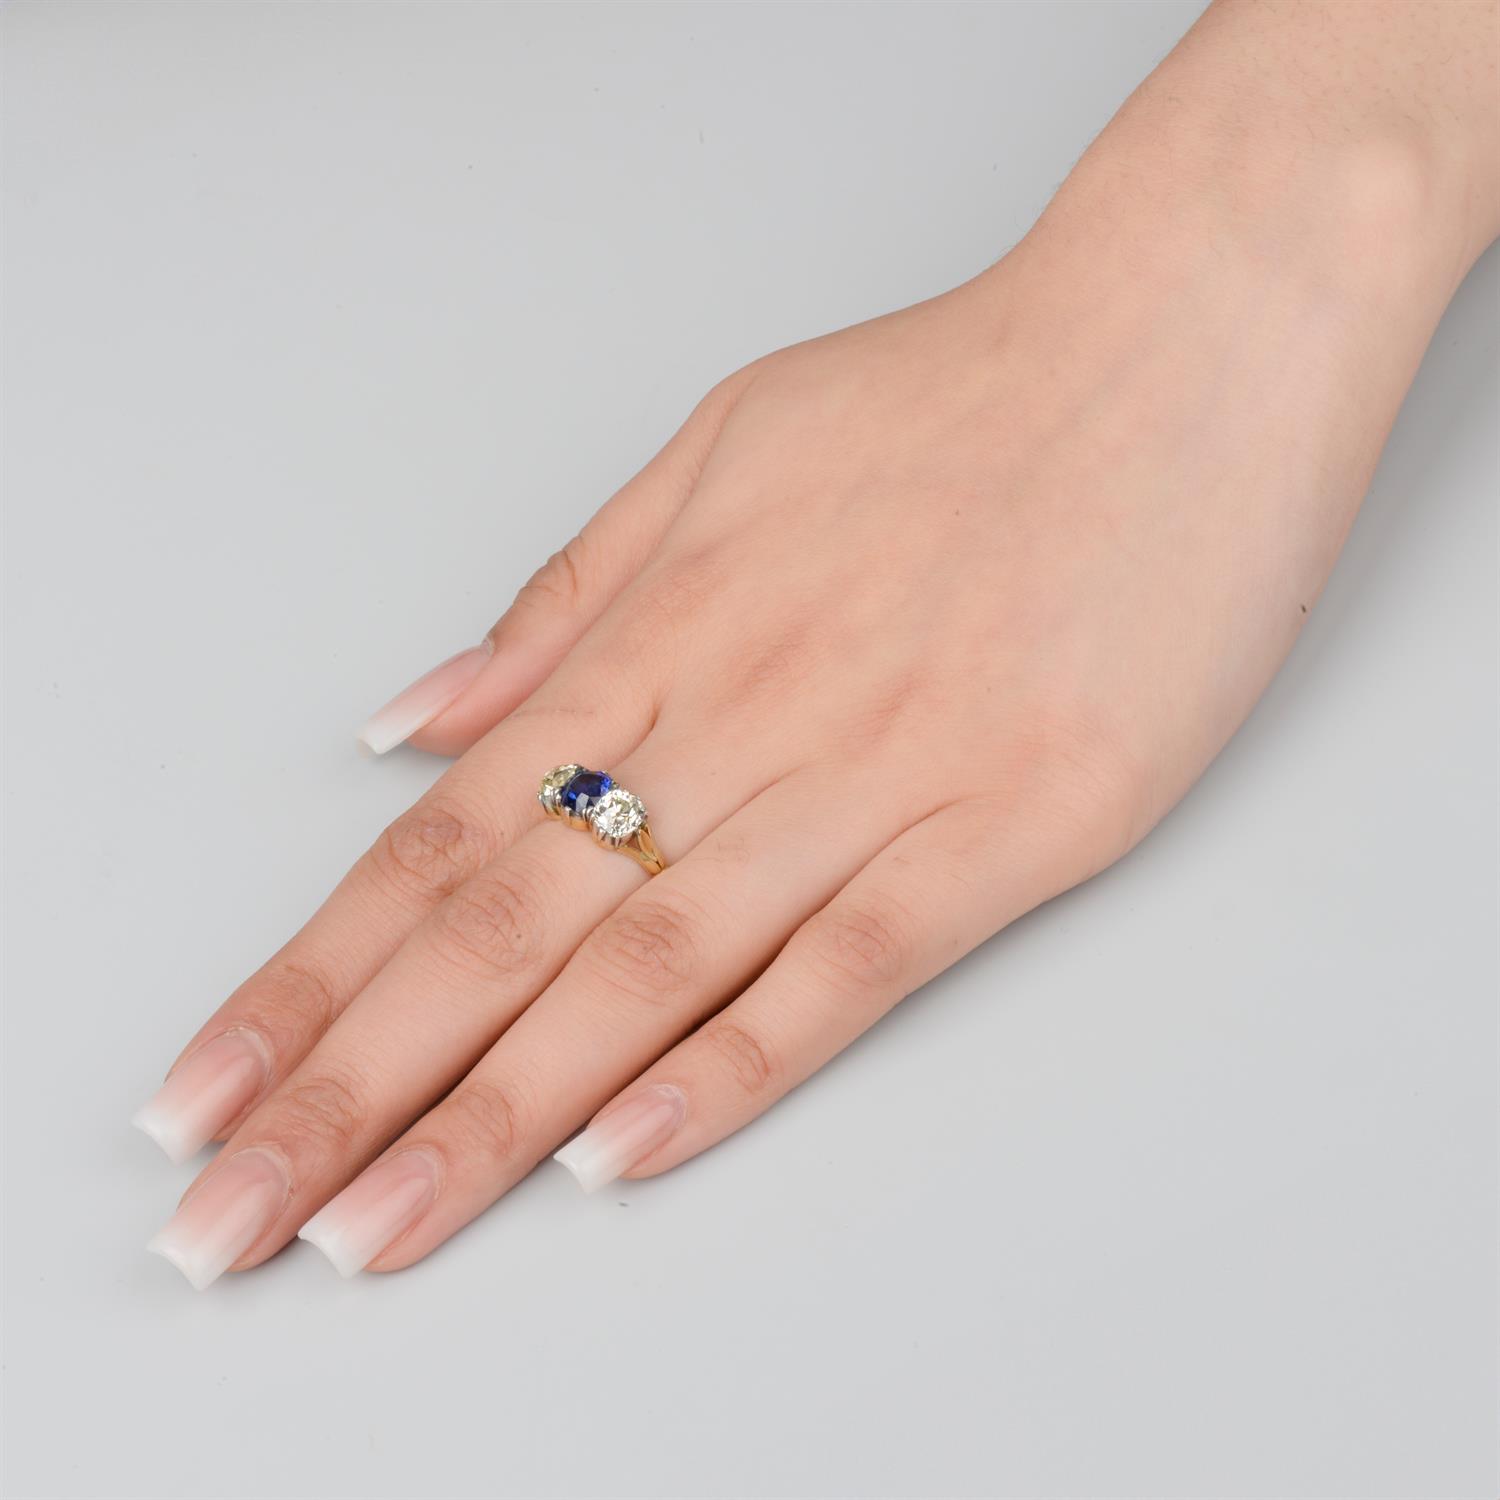 Late 19th century sapphire and old-cut diamond ring - Image 5 of 5